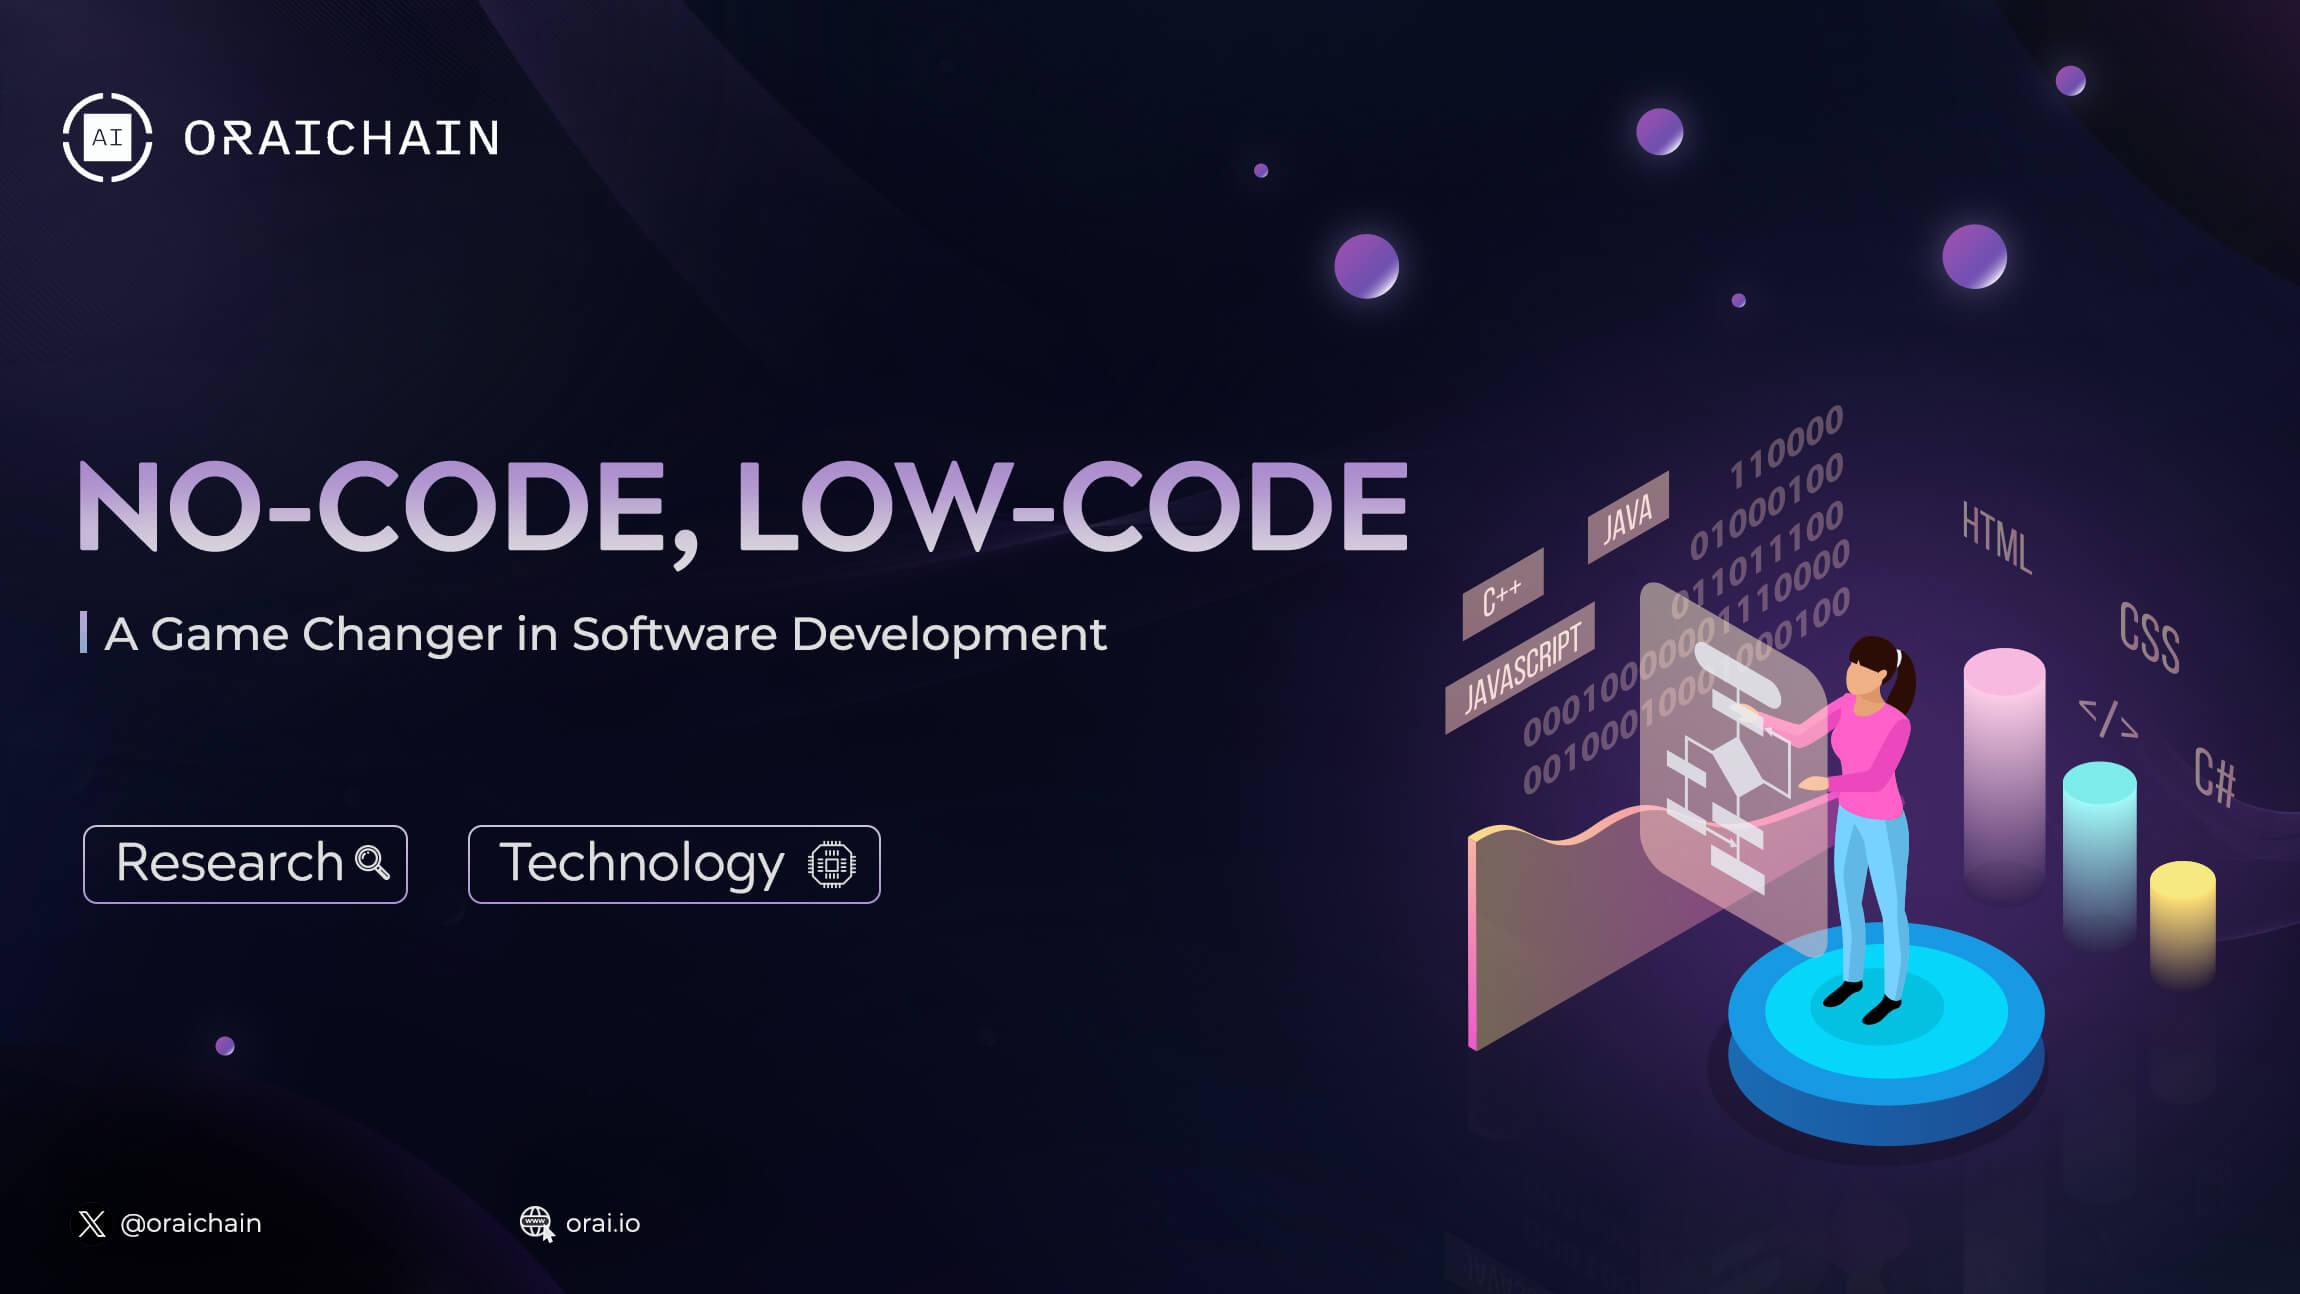 No-Code, Low-Code: A Game Changer in Software Development